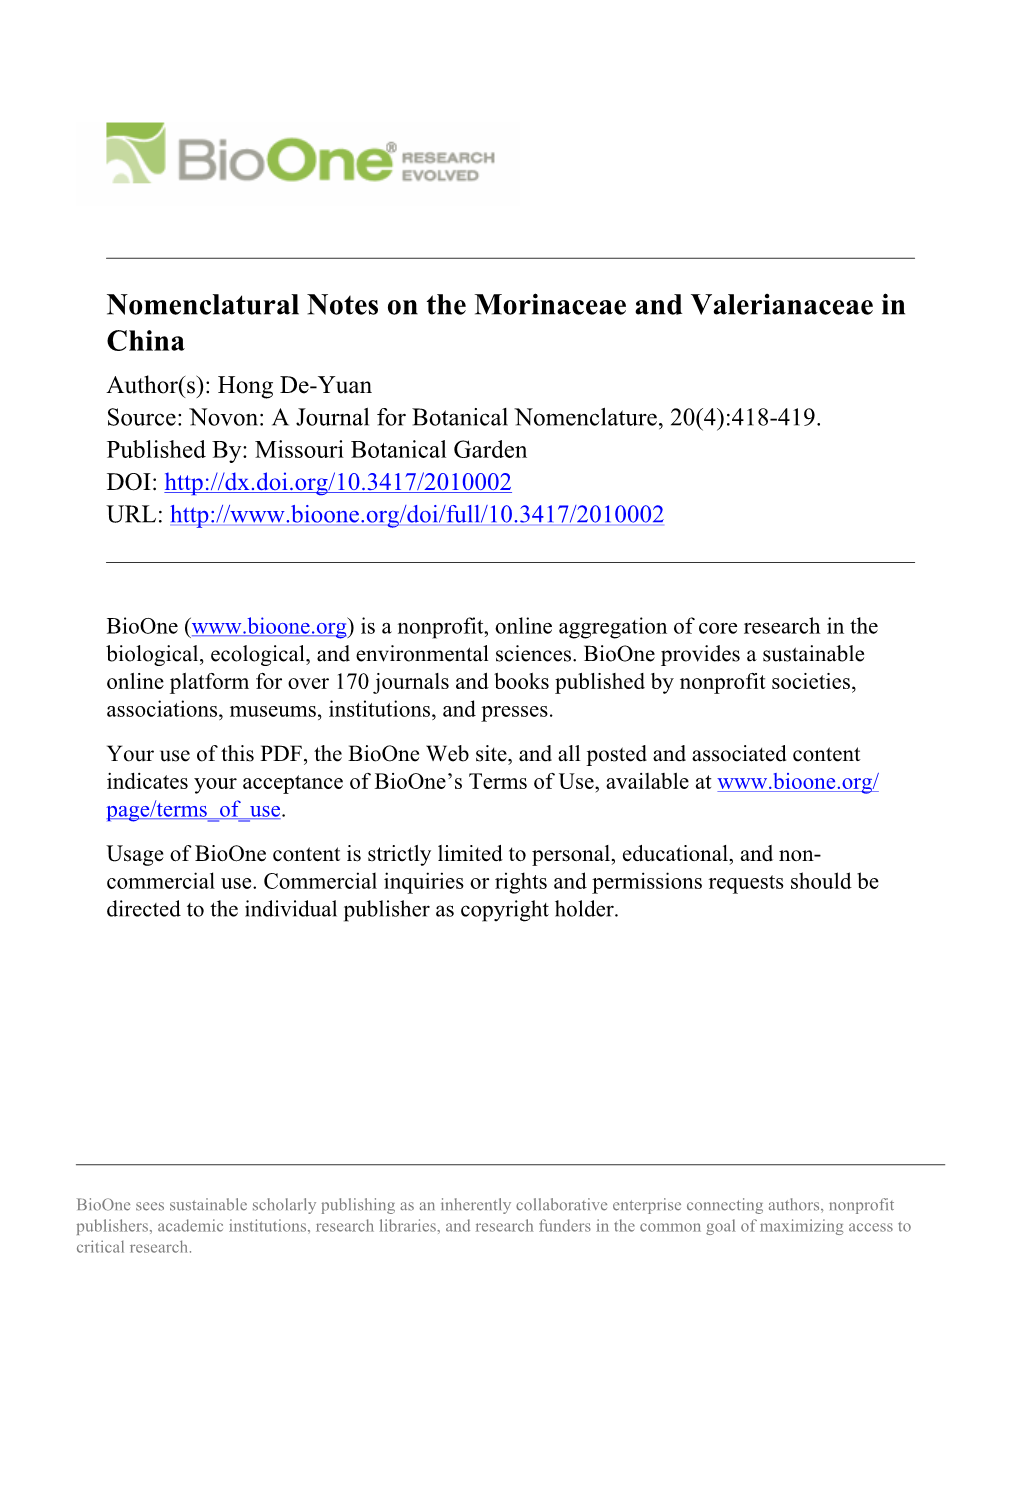 Nomenclatural Notes on the Morinaceae and Valerianaceae in China Author(S): Hong De-Yuan Source: Novon: a Journal for Botanical Nomenclature, 20(4):418-419